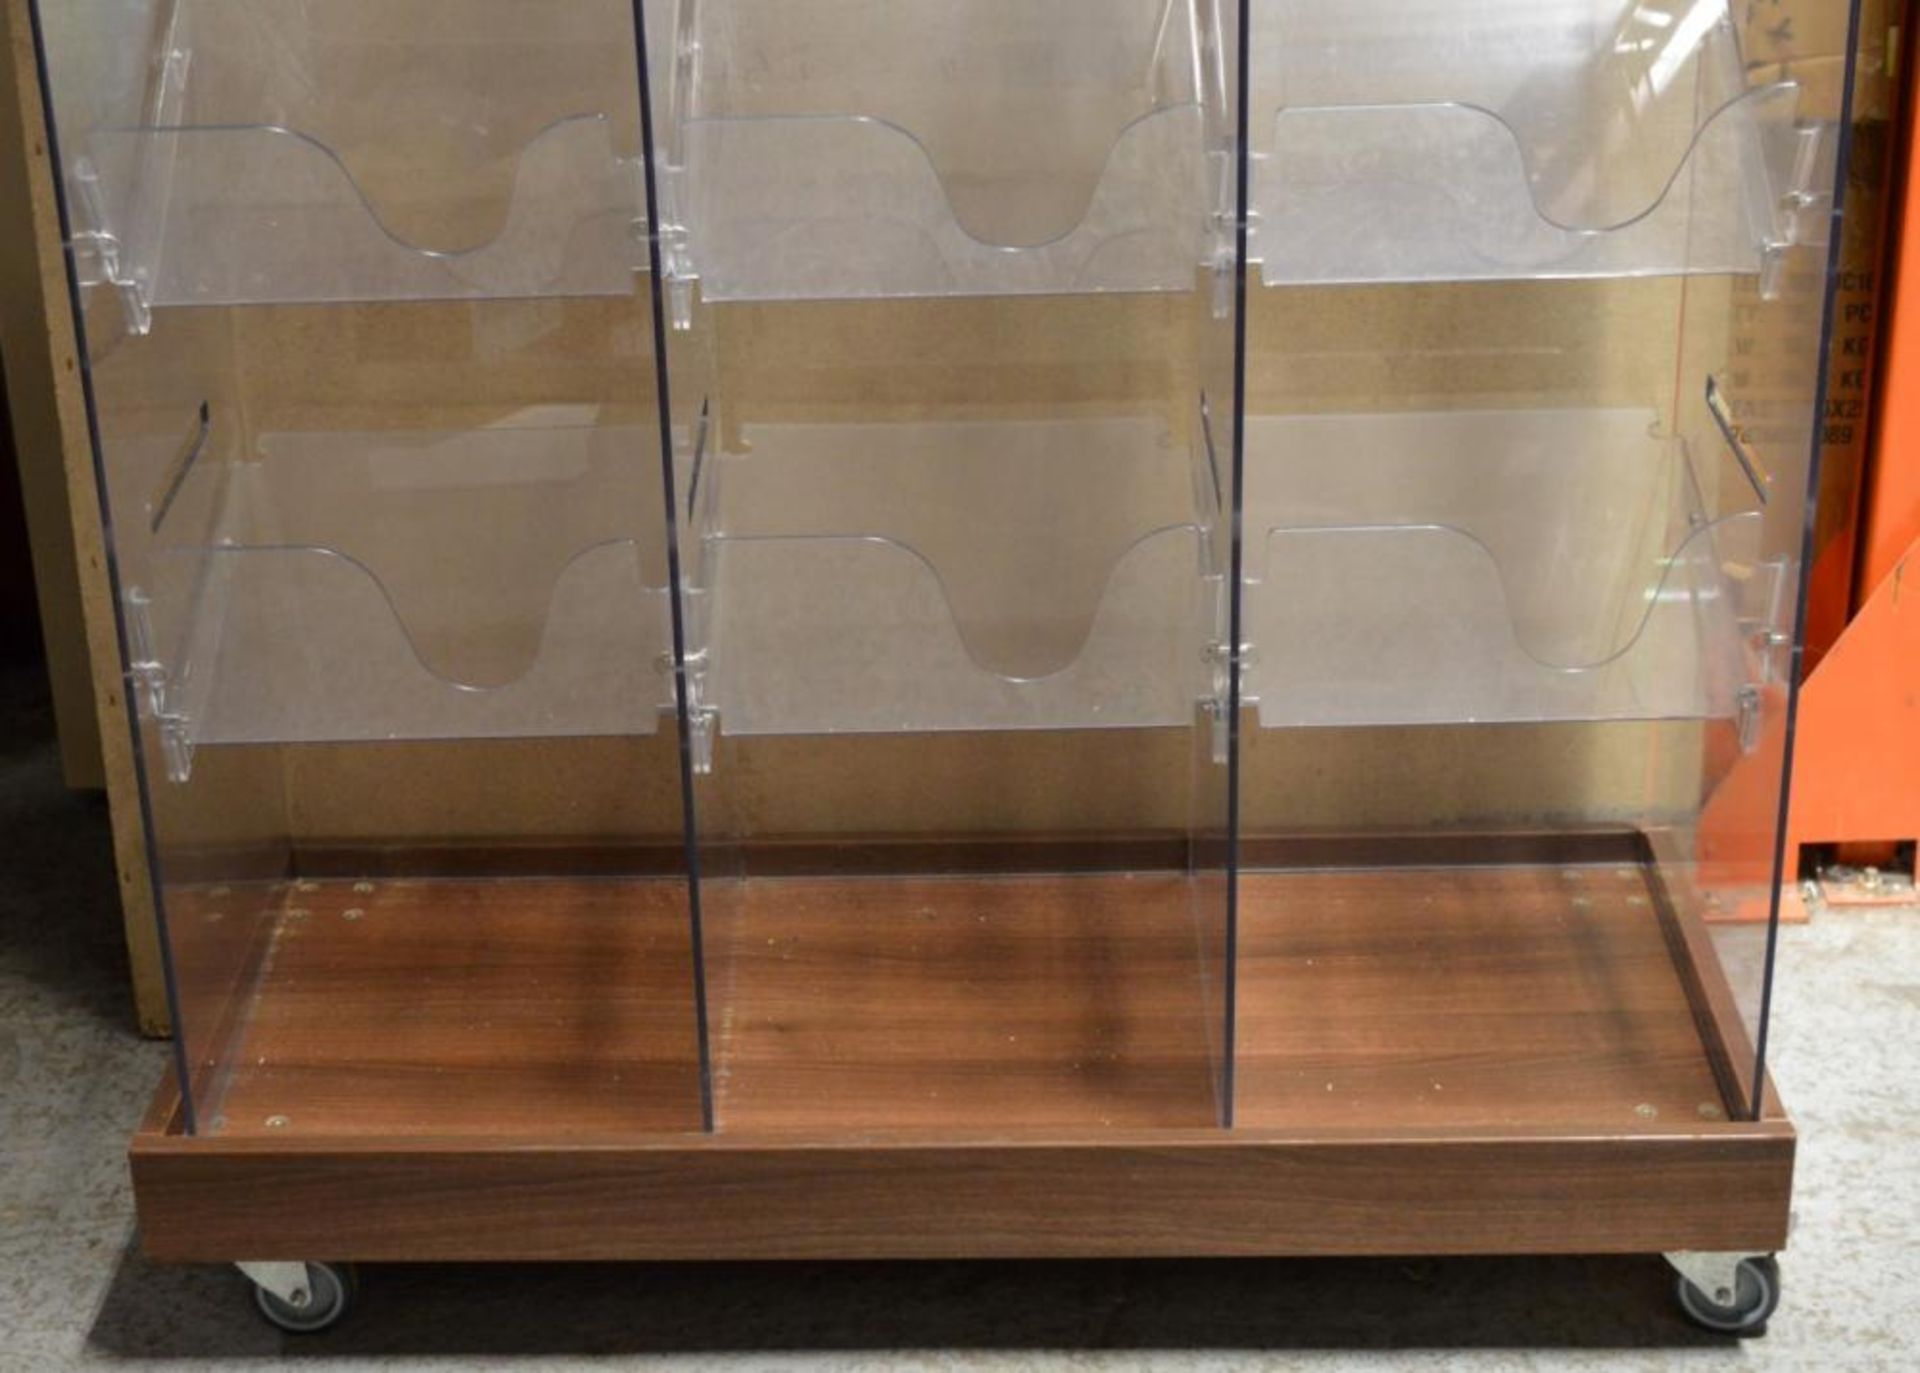 1 x Retail Magazine / Newspaper Display Unit - Clear Perspex With Walnut Base on Castors - H141 x - Image 6 of 6